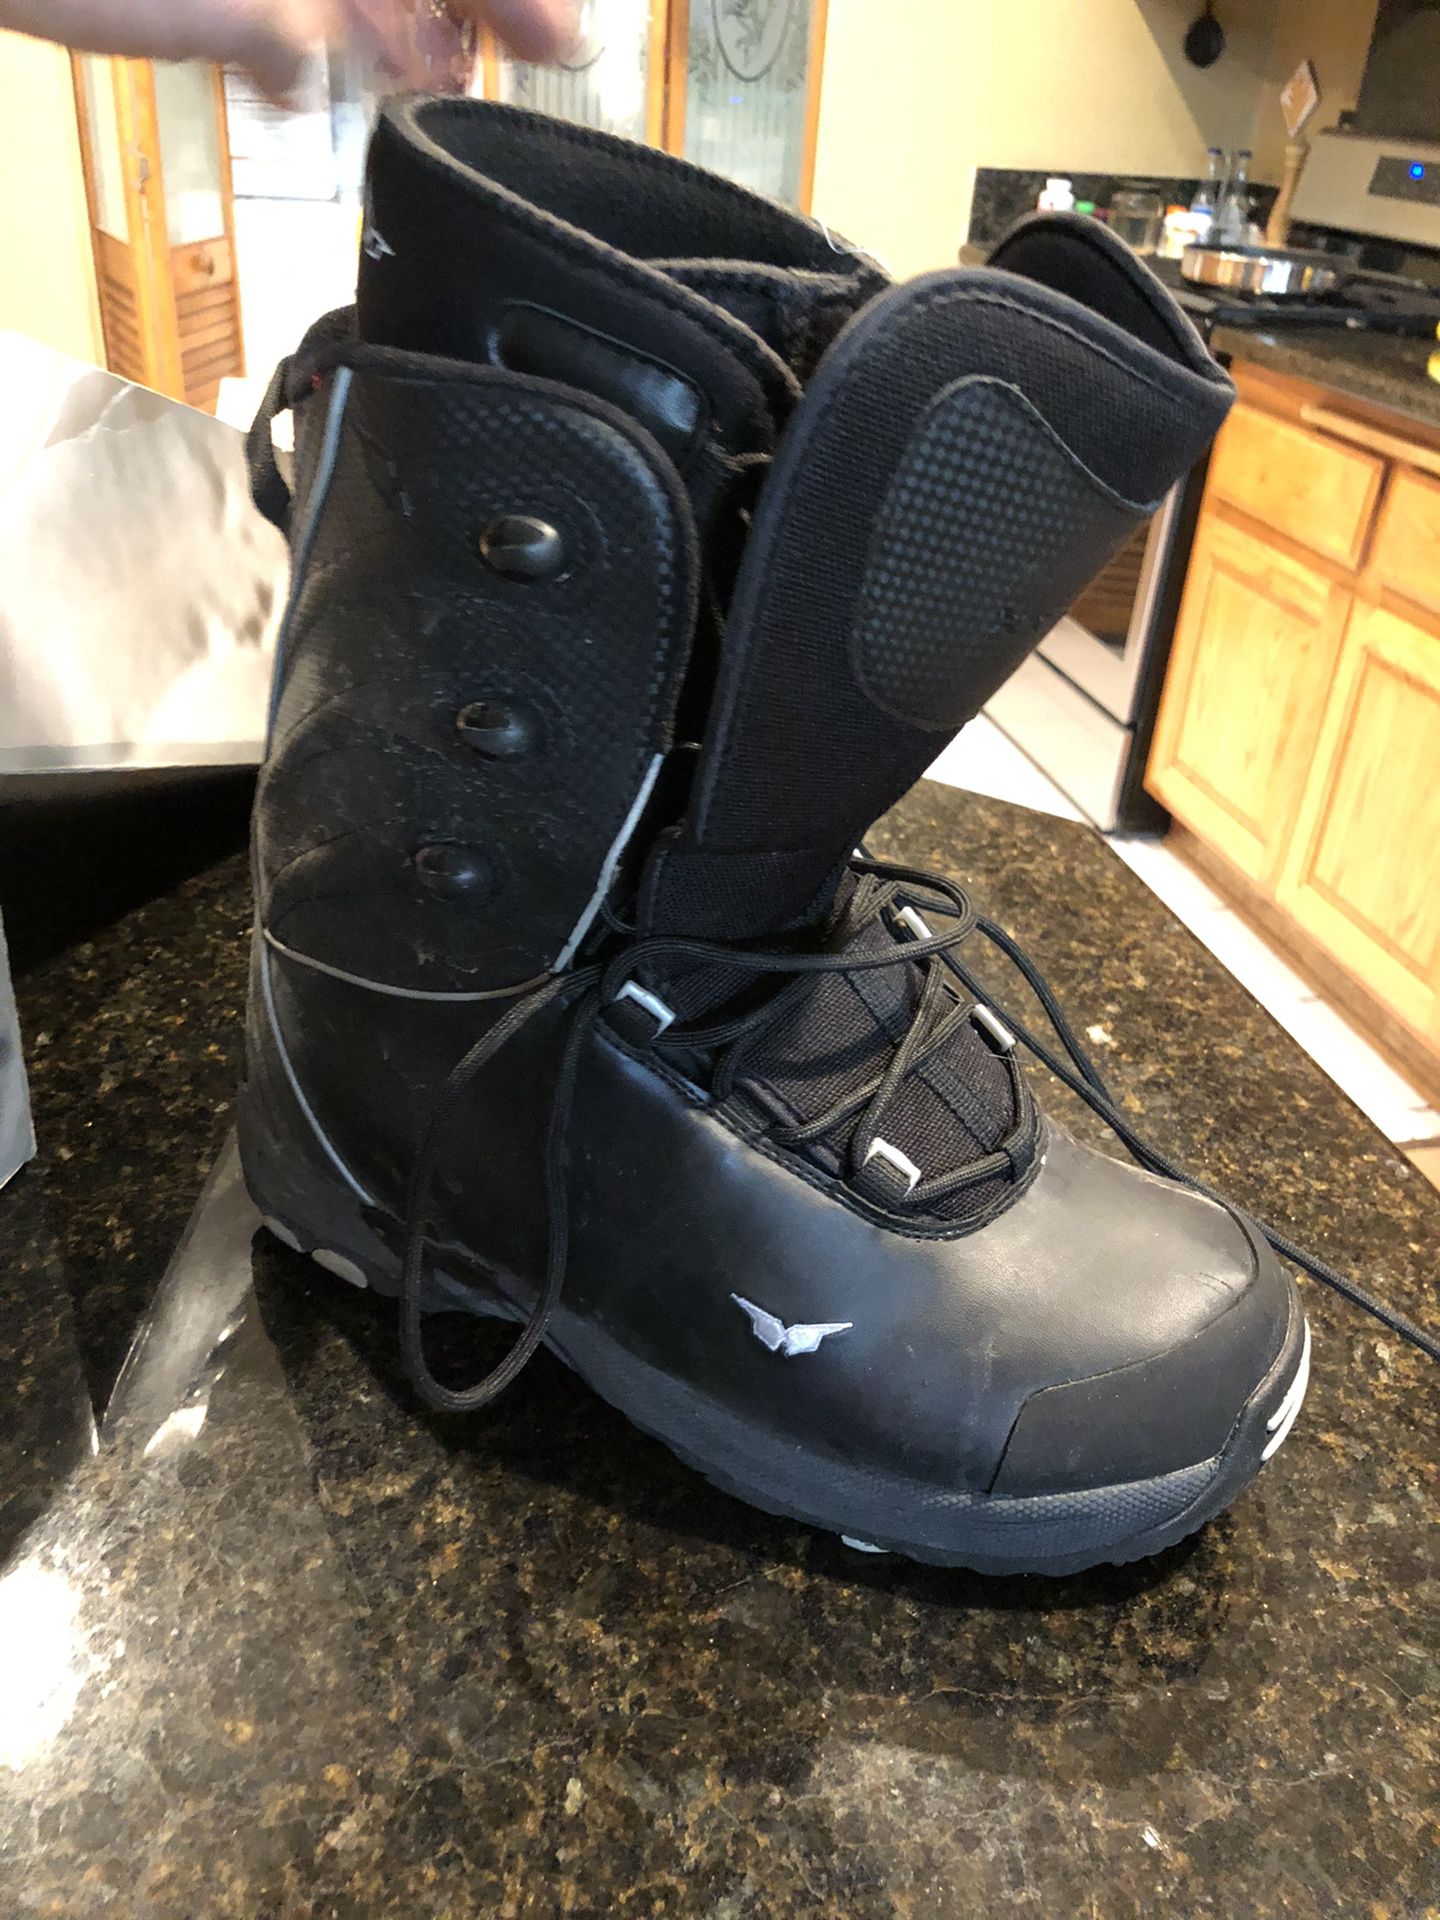 Snow boarding boots